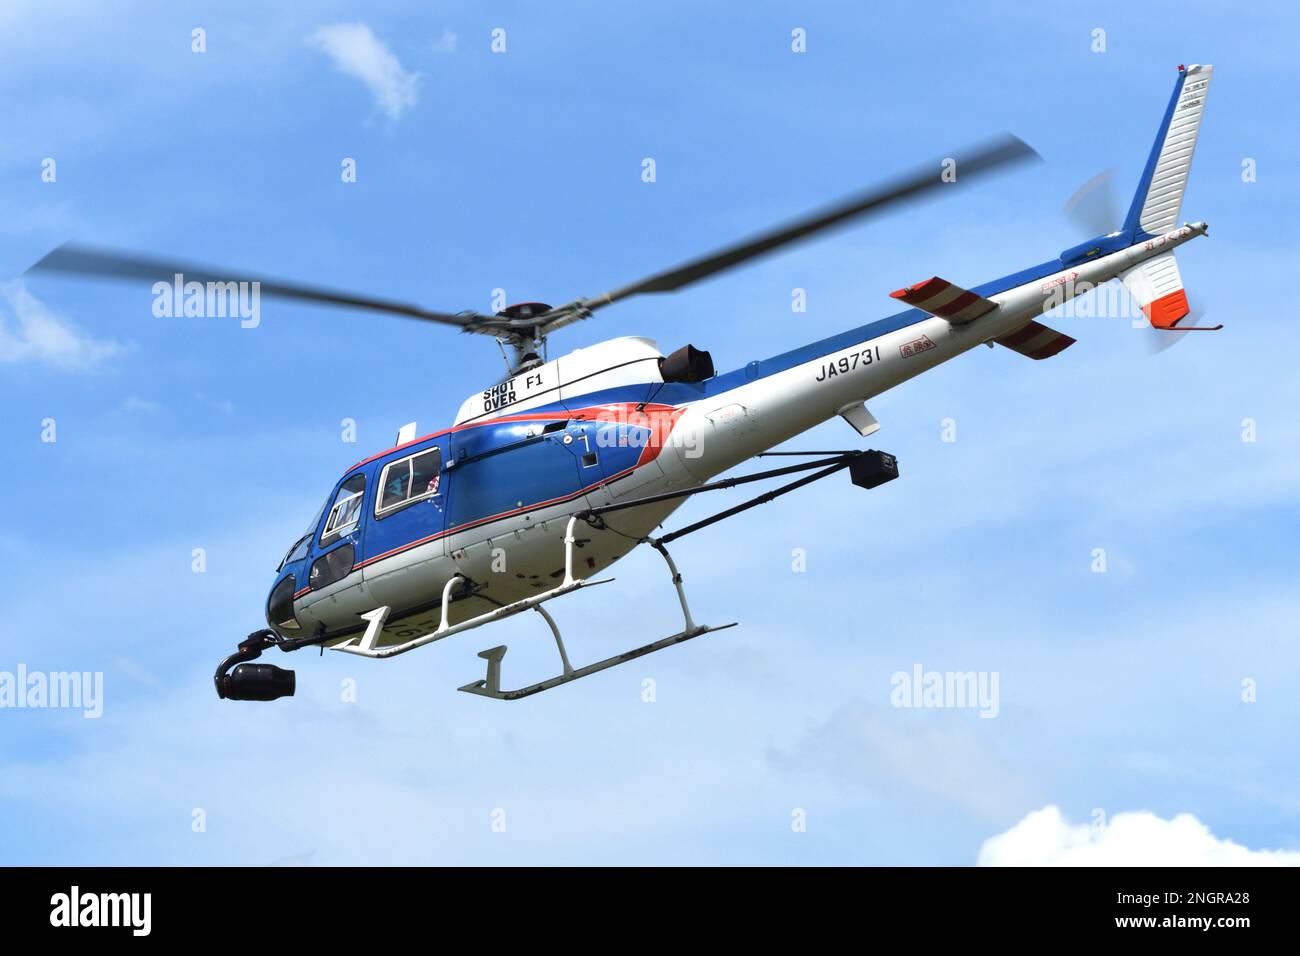 Tokyo, Japan - August 11, 2021: Akagi Helicopter Eurocopter AS350B1 Ecureuil (JA9731) light utility helicopter. Stock Photo